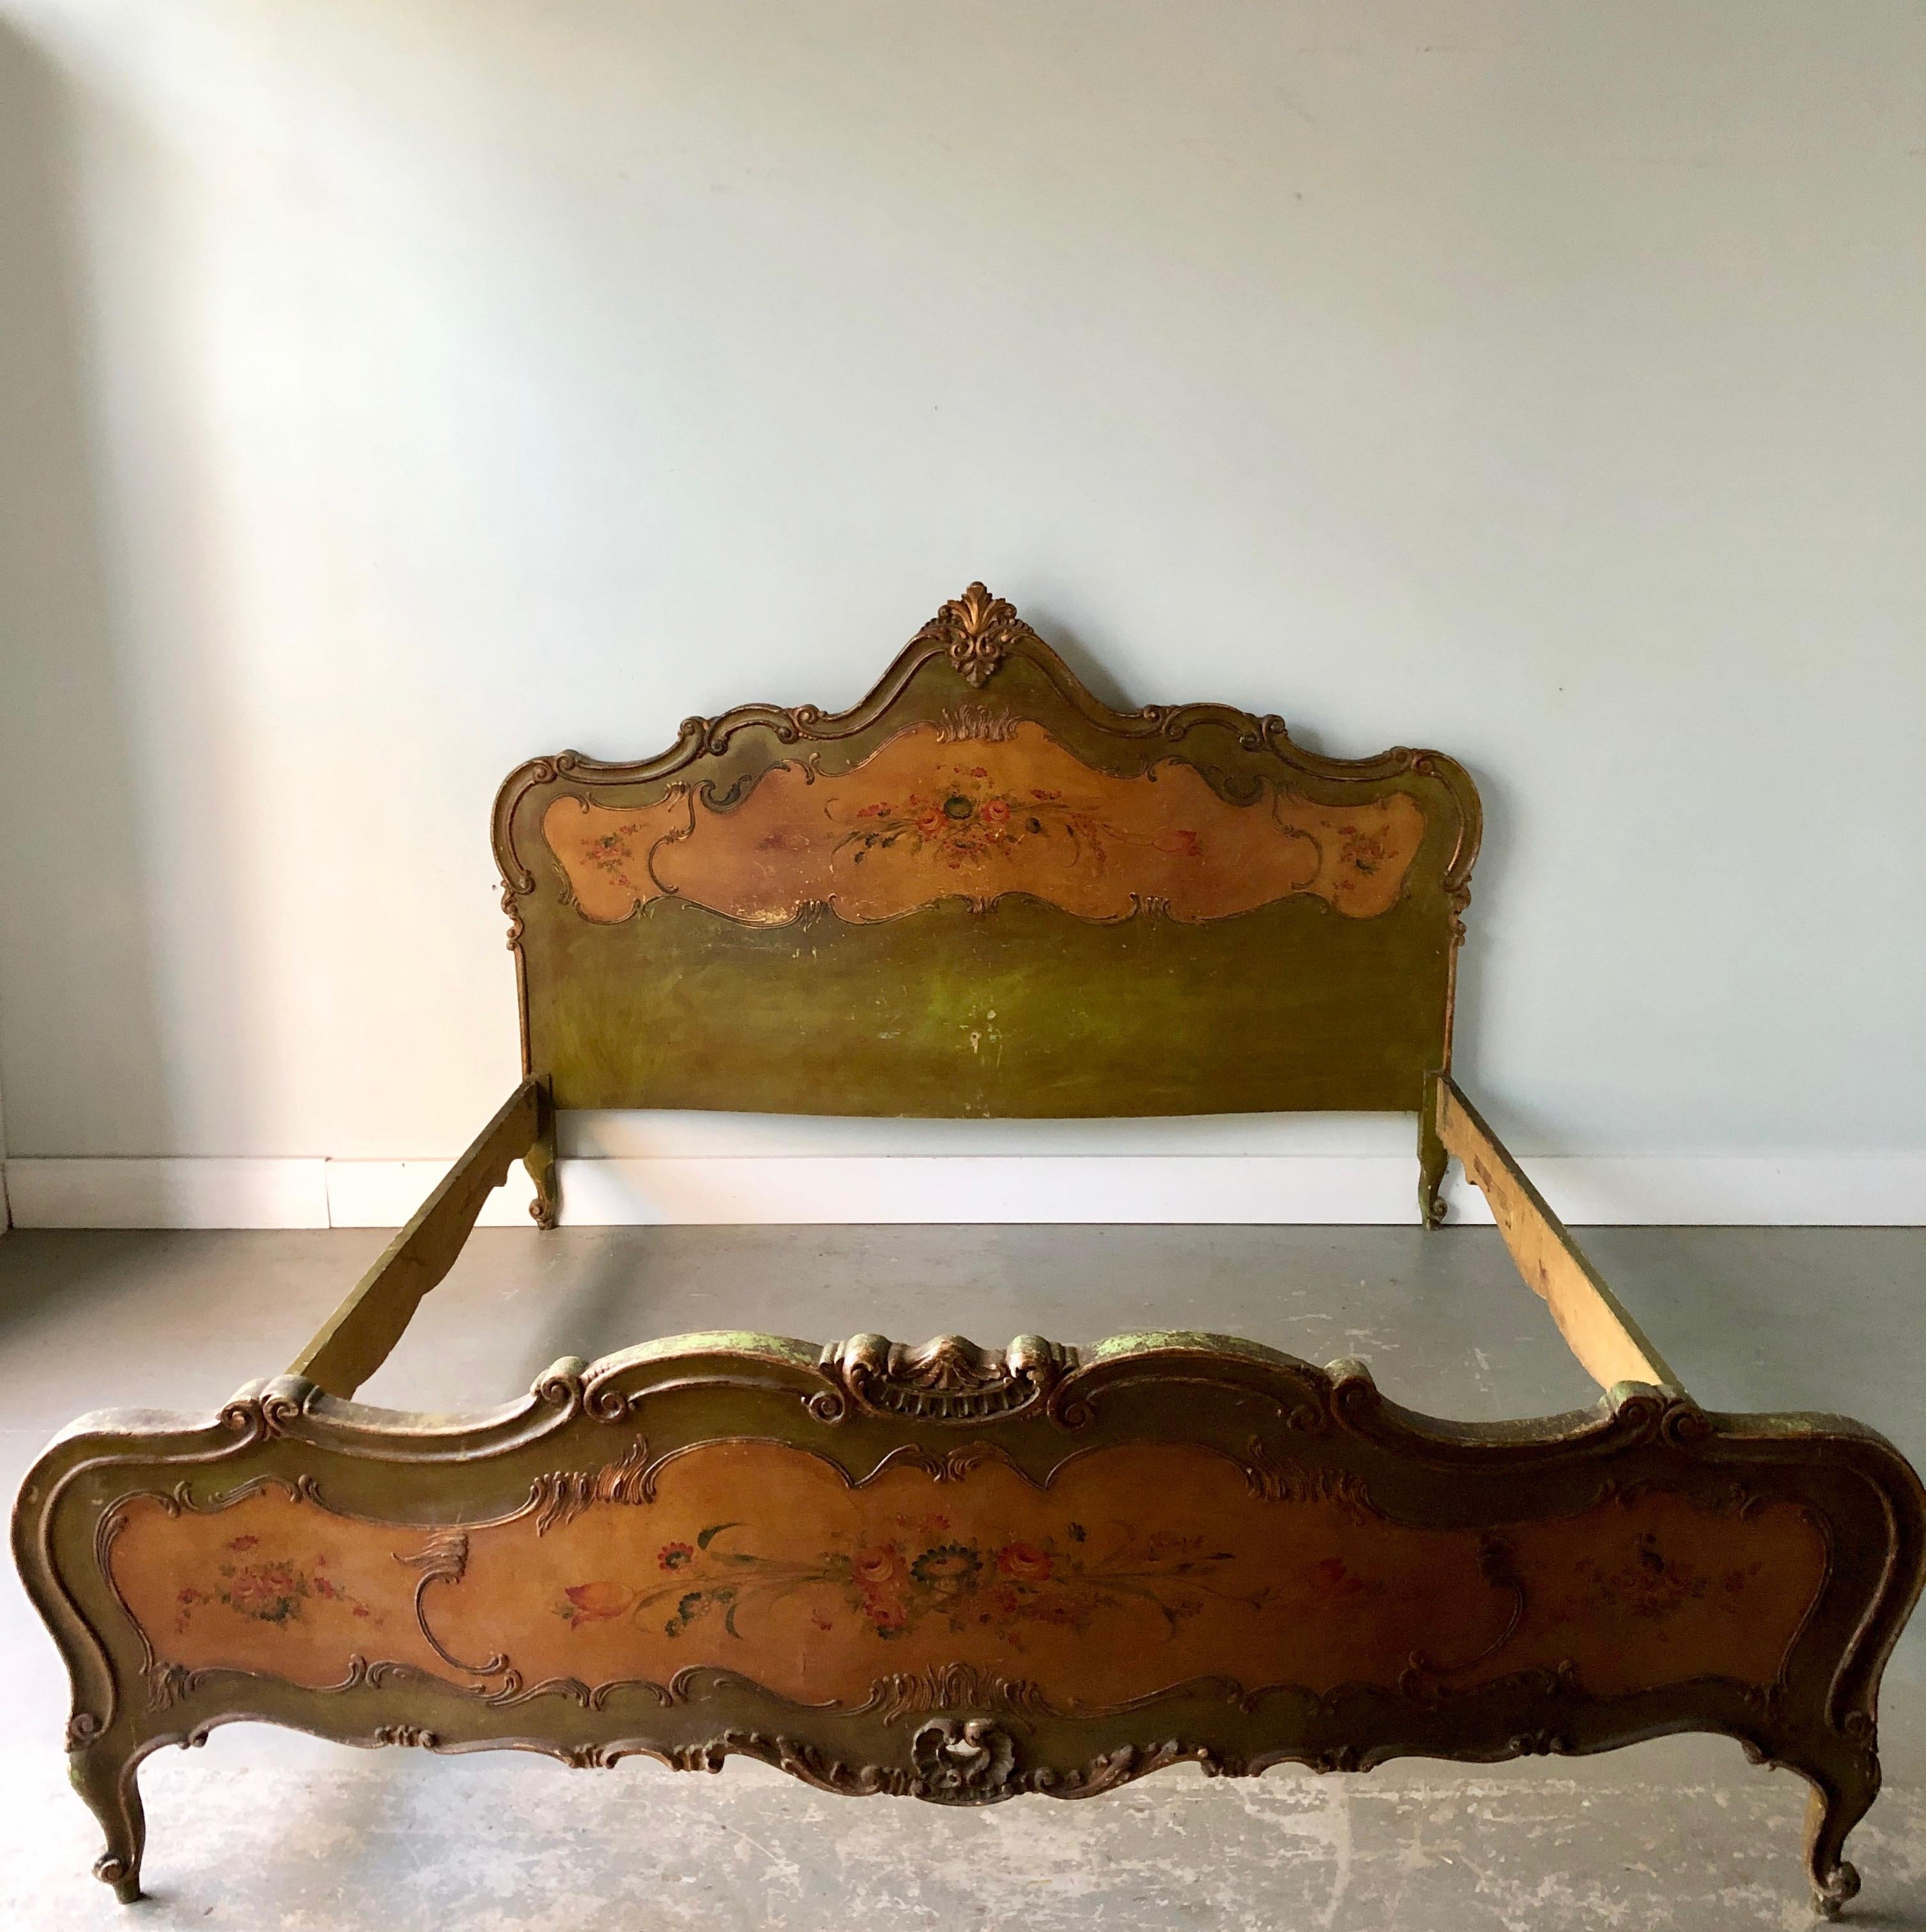 Antique Italian painted double bed in green with gilt accent and intricate hand painted with floral design in Venetian style.
Inside bed measurements:
70.75